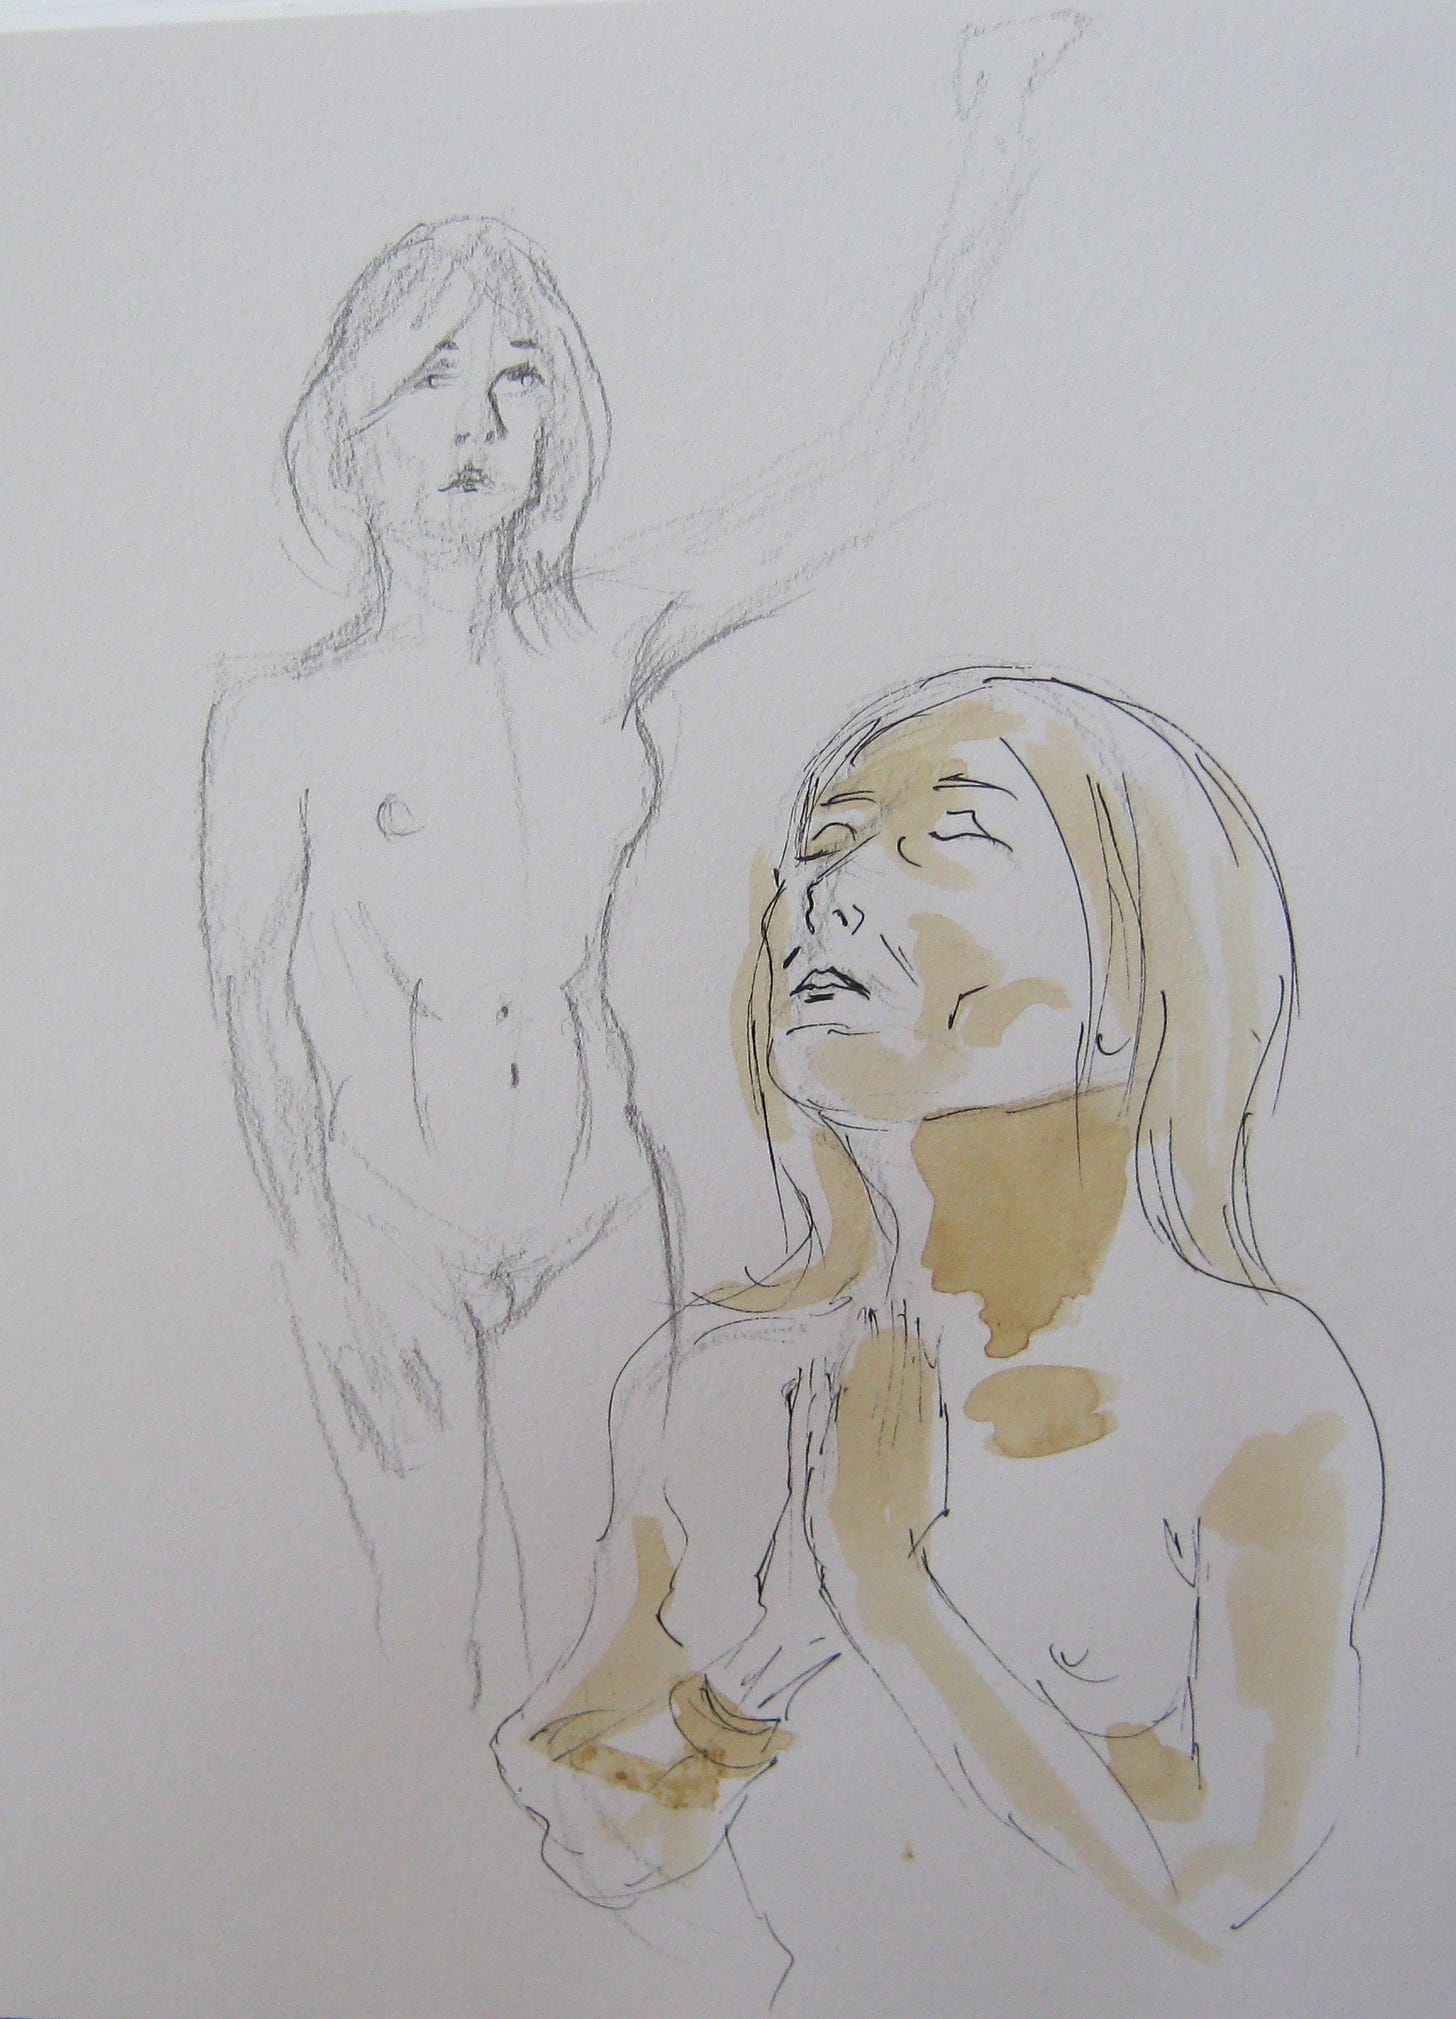 Sketches of Jillian Page by Paul Davidson.